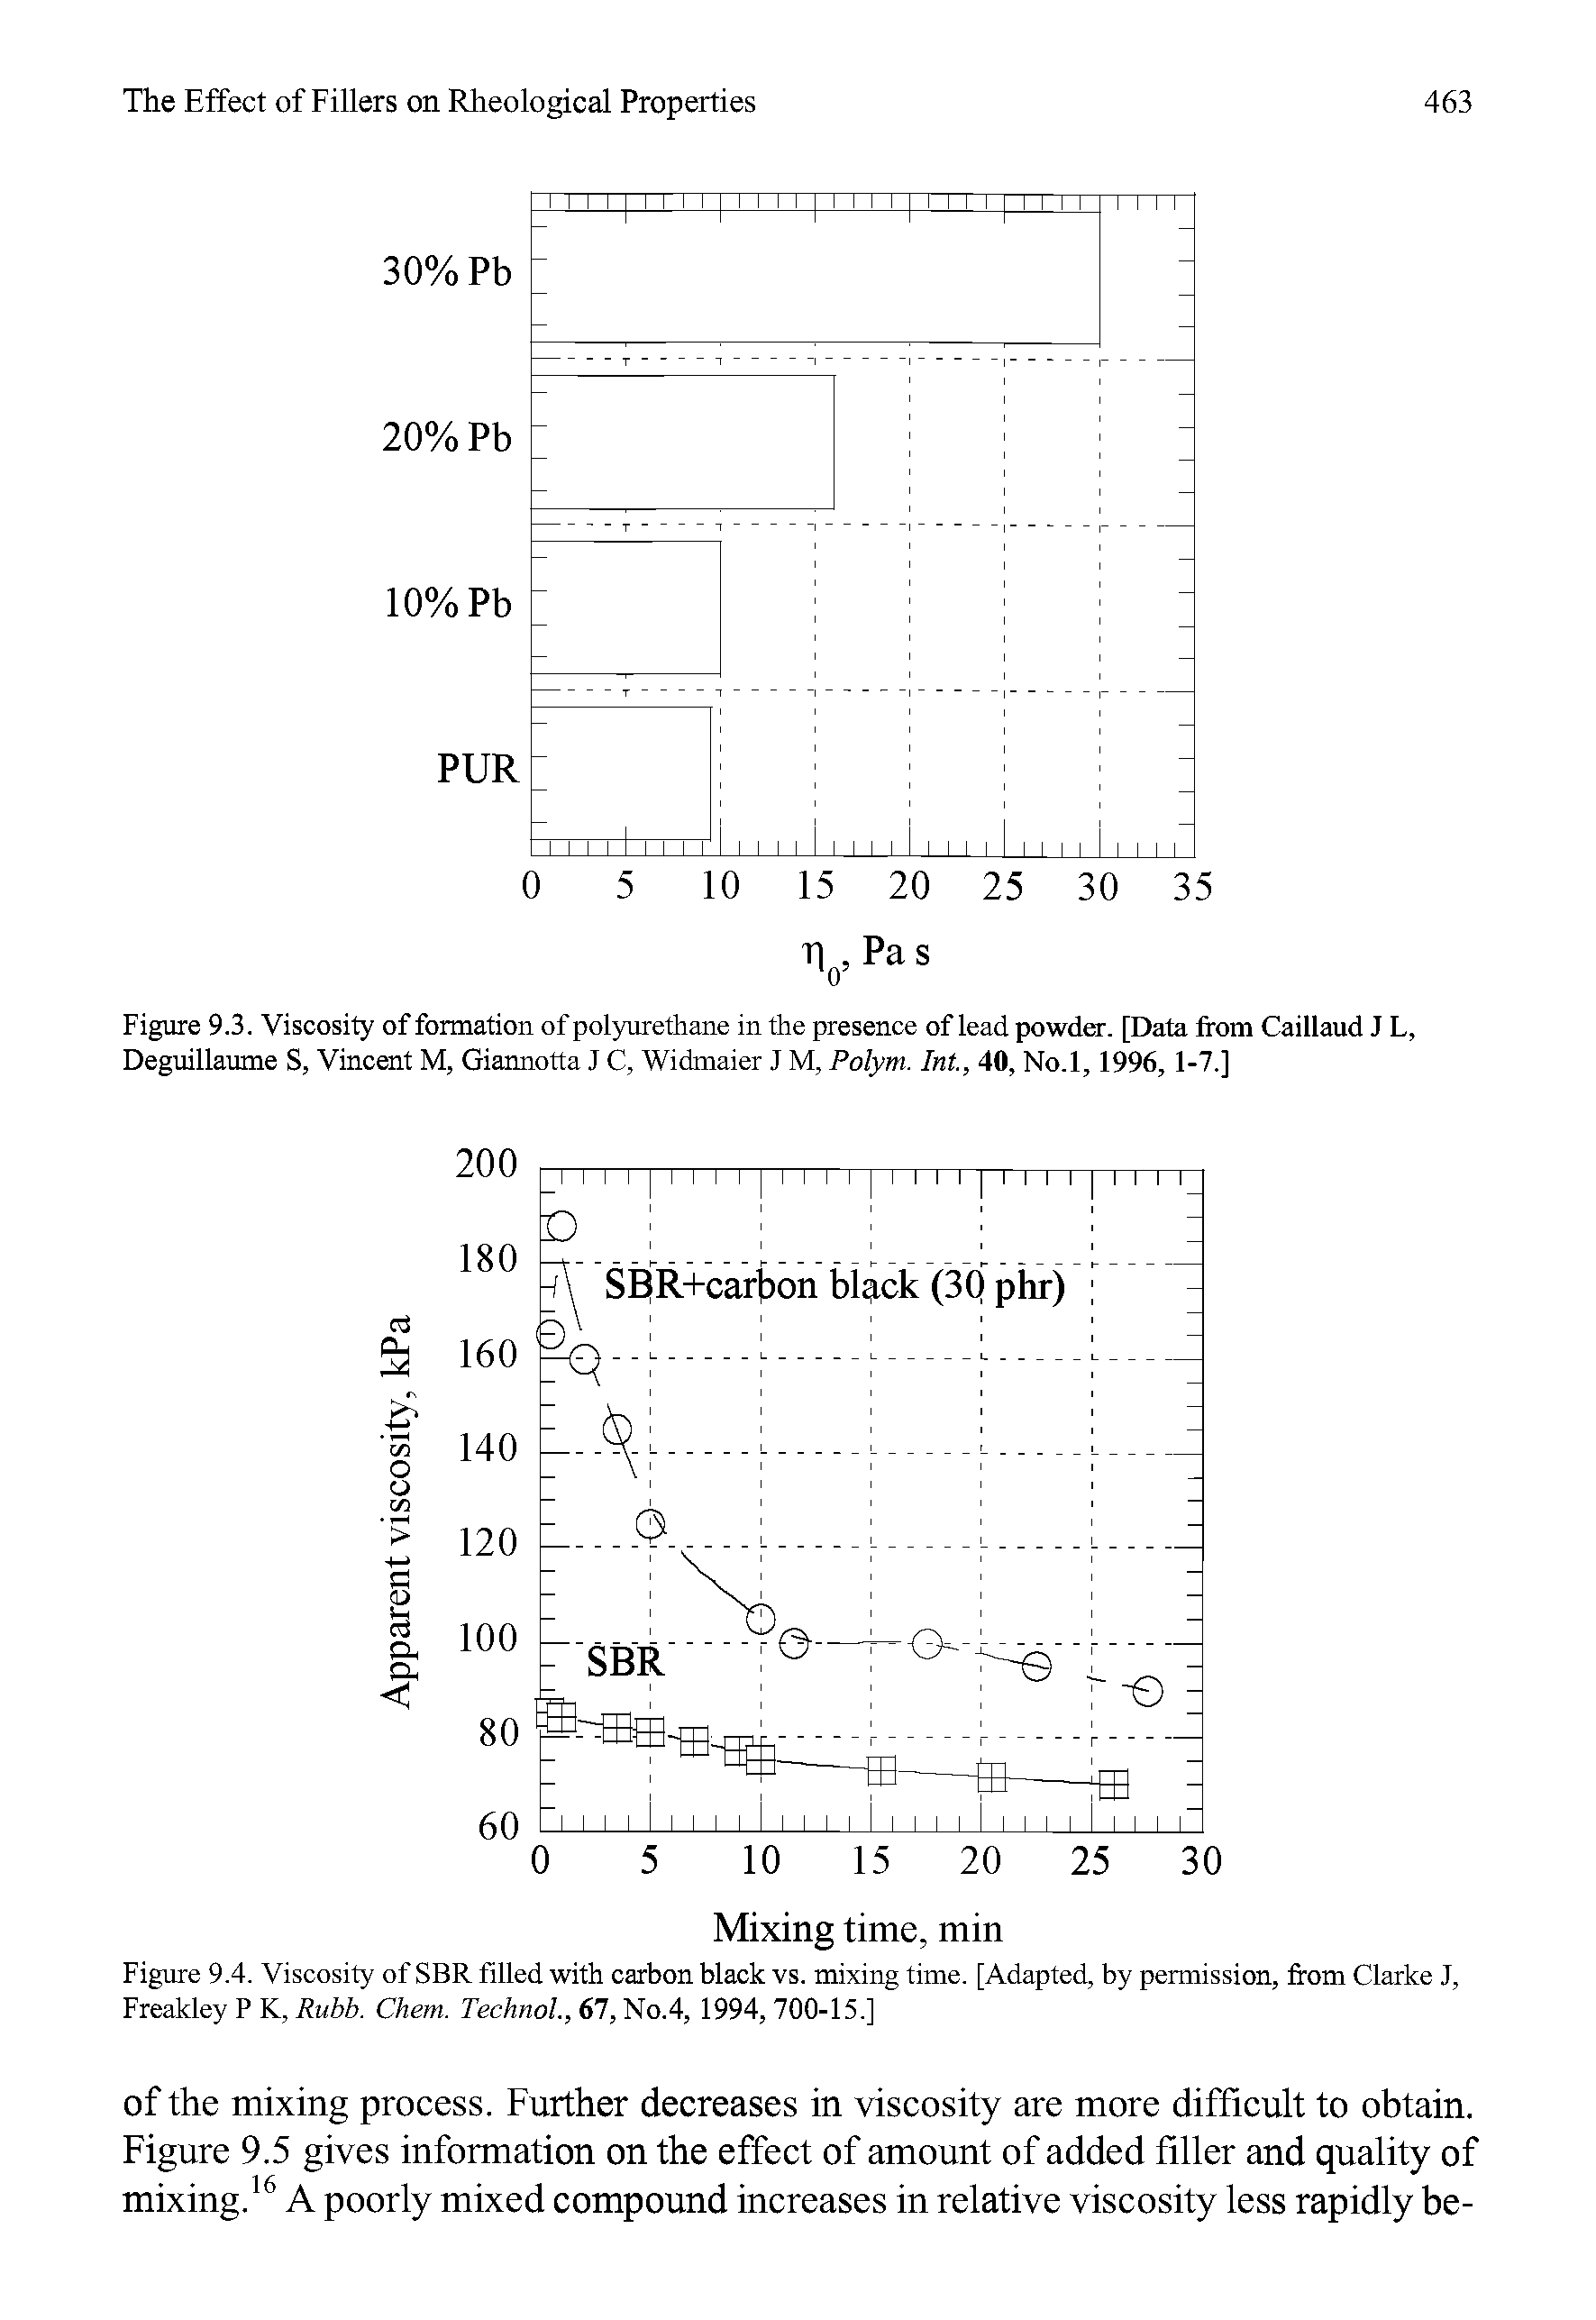 Figure 9.3. Viscosity of formation of polyurethane in the presence of lead powder. [Data from Caillaud J L, Deguillaume S, Vincent M, Giannotta J C, Widmaier J VI. Polym. Int., 40, No.l, 1996, 1-7.]...